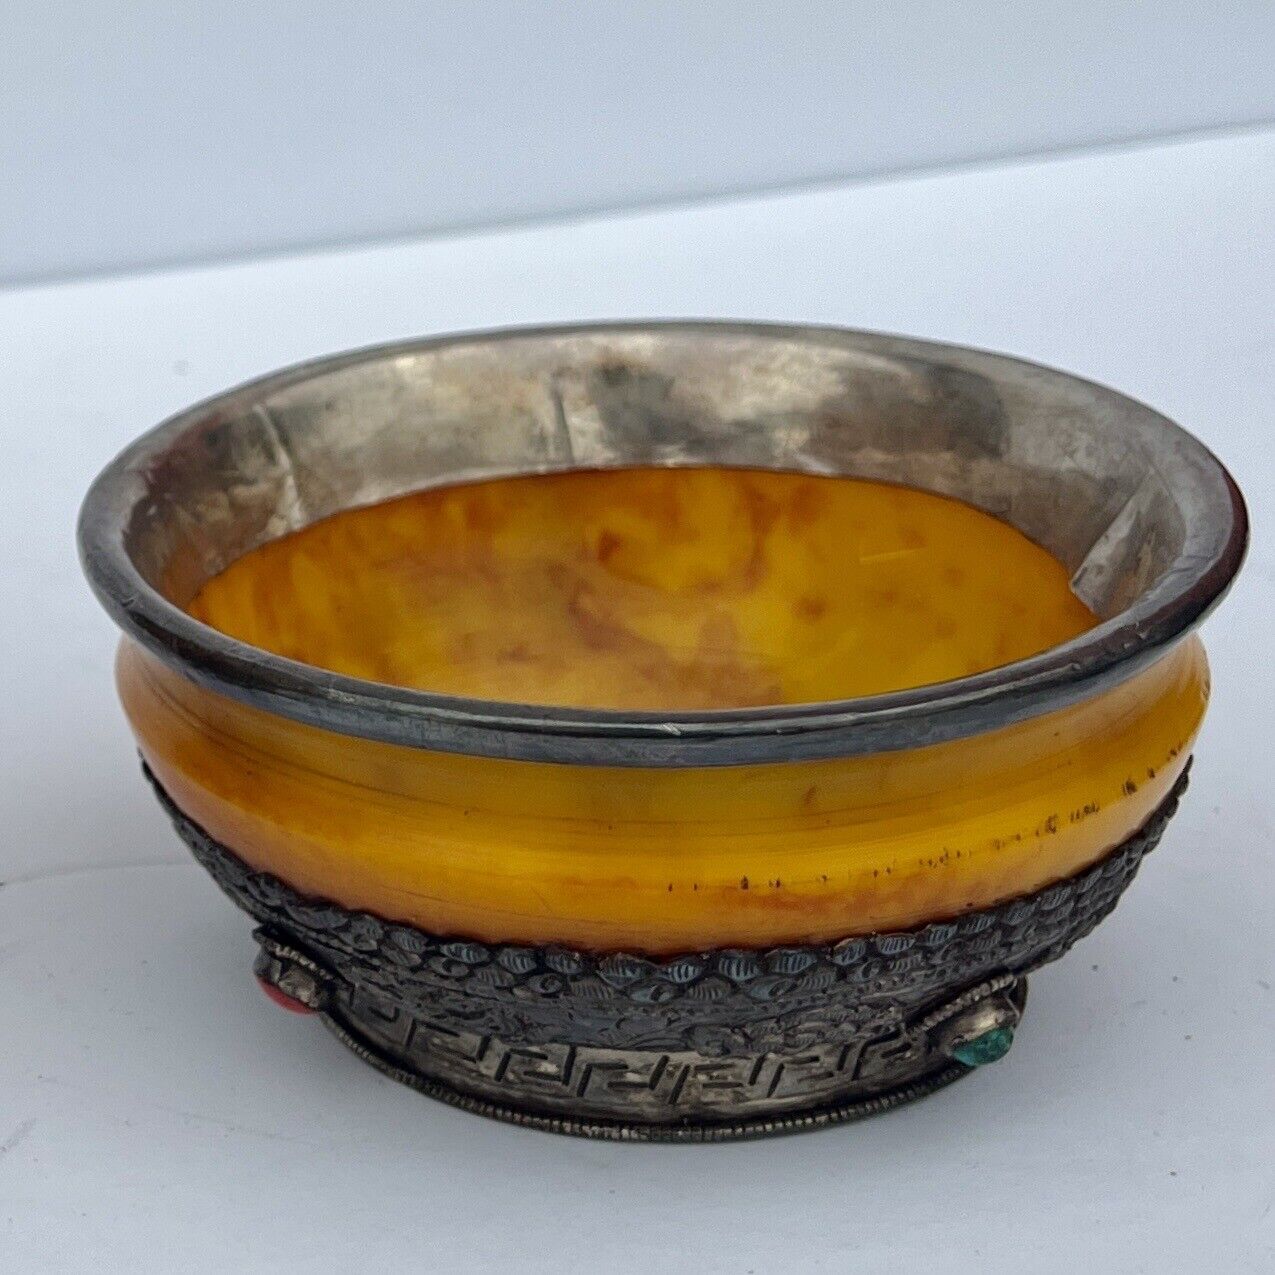 Buddhist Lama Ritual Amber Dust Bowl with Turquoise and Coral and Silver 3” H